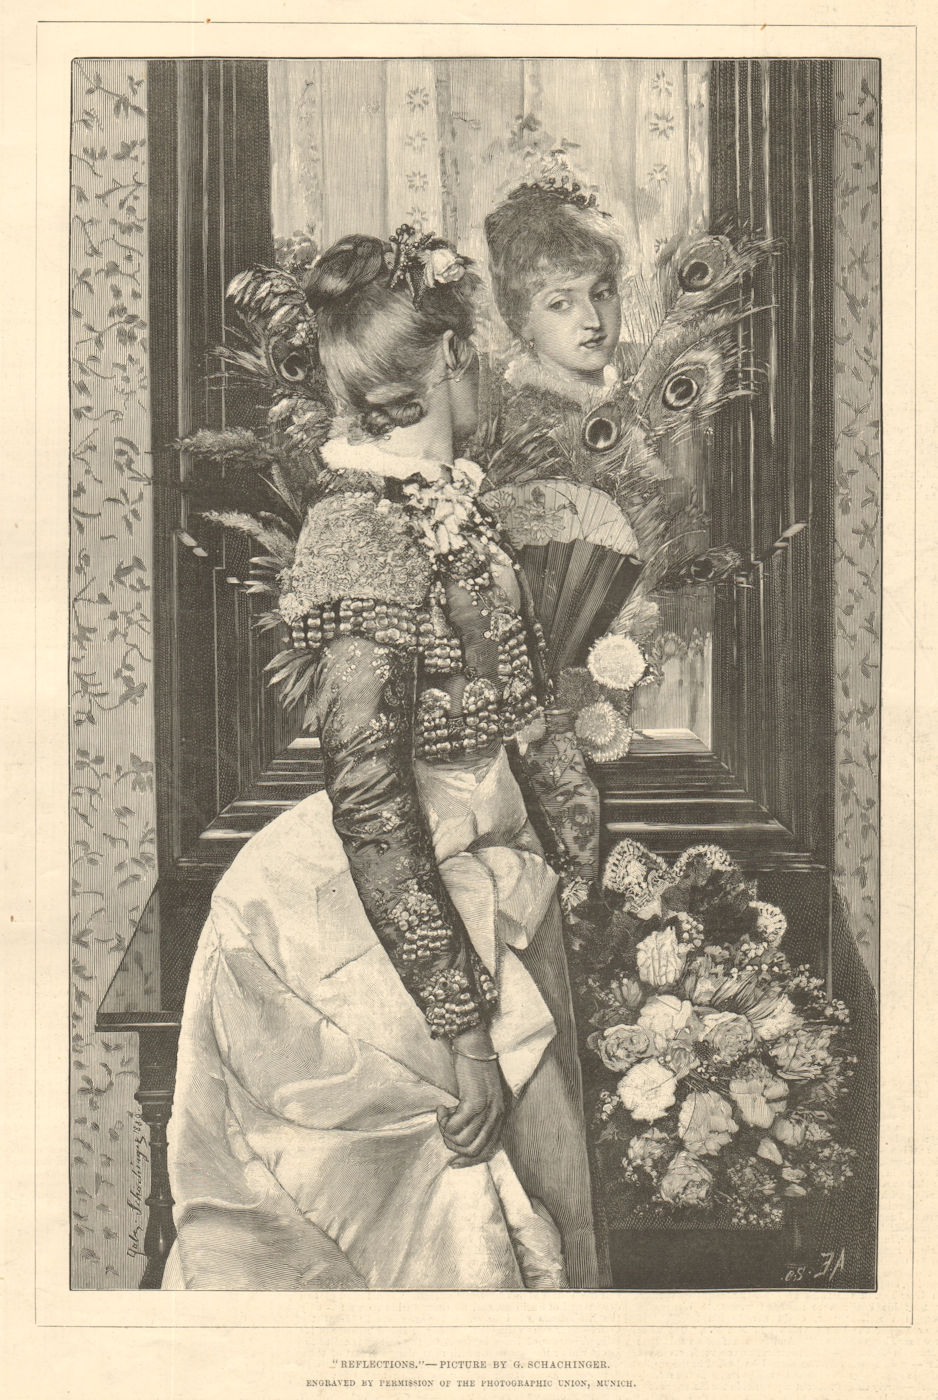 Associate Product "Reflections", picture by G. Schachinger. Germany 1890 antique ILN full page